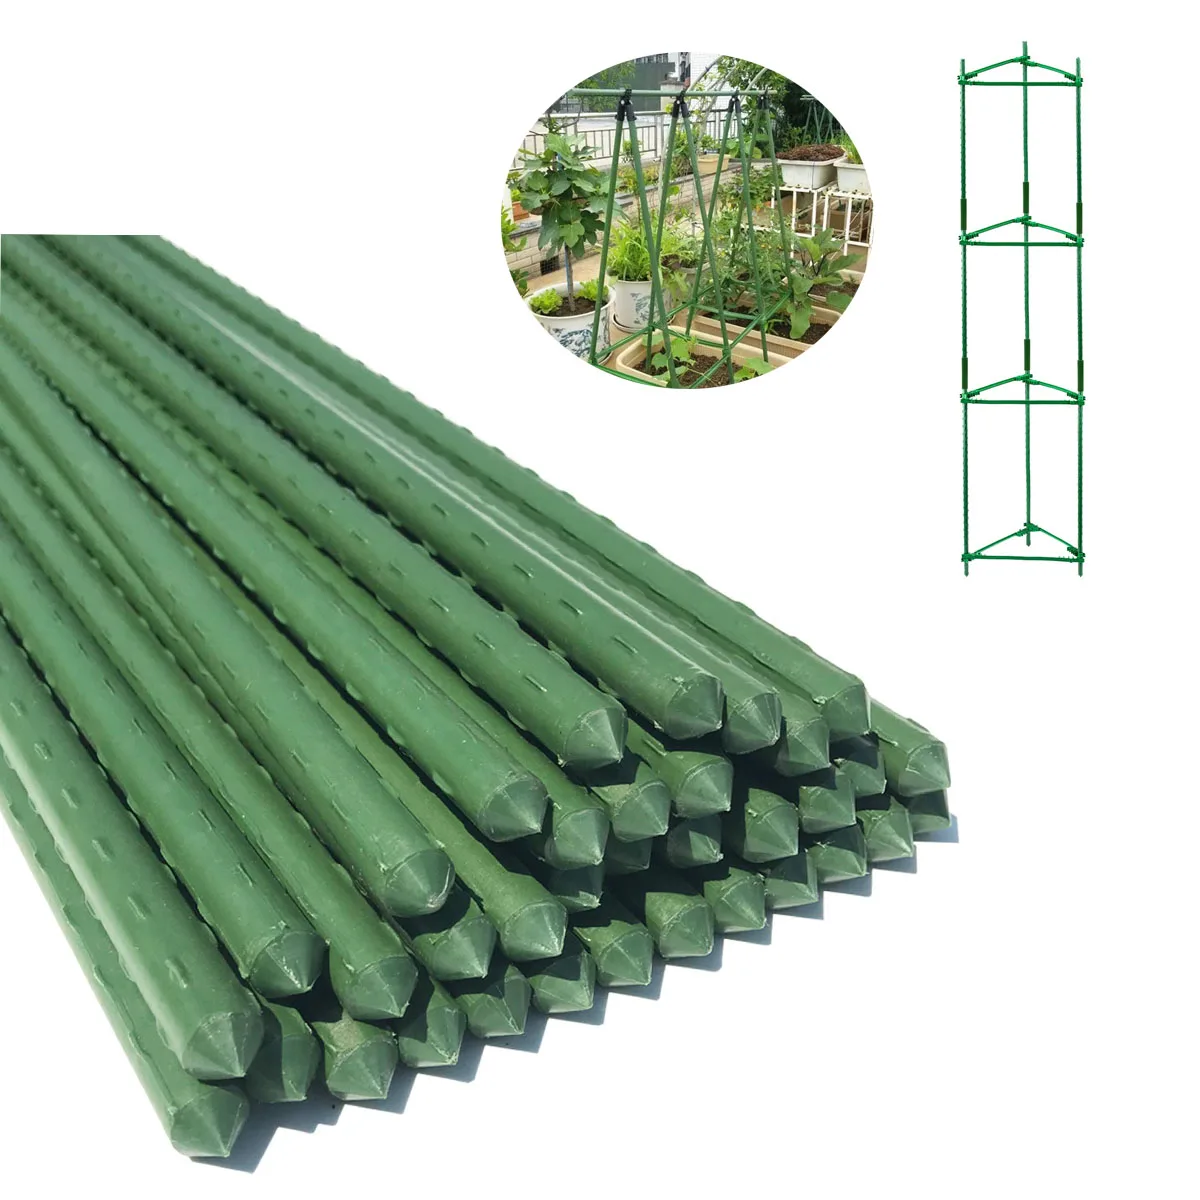 

15 Pack Garden Stakes Sturdy Green Plant Sticks Metal Tomato Stakes Support Yard Plant Support Cage For Potted Plants 11mm